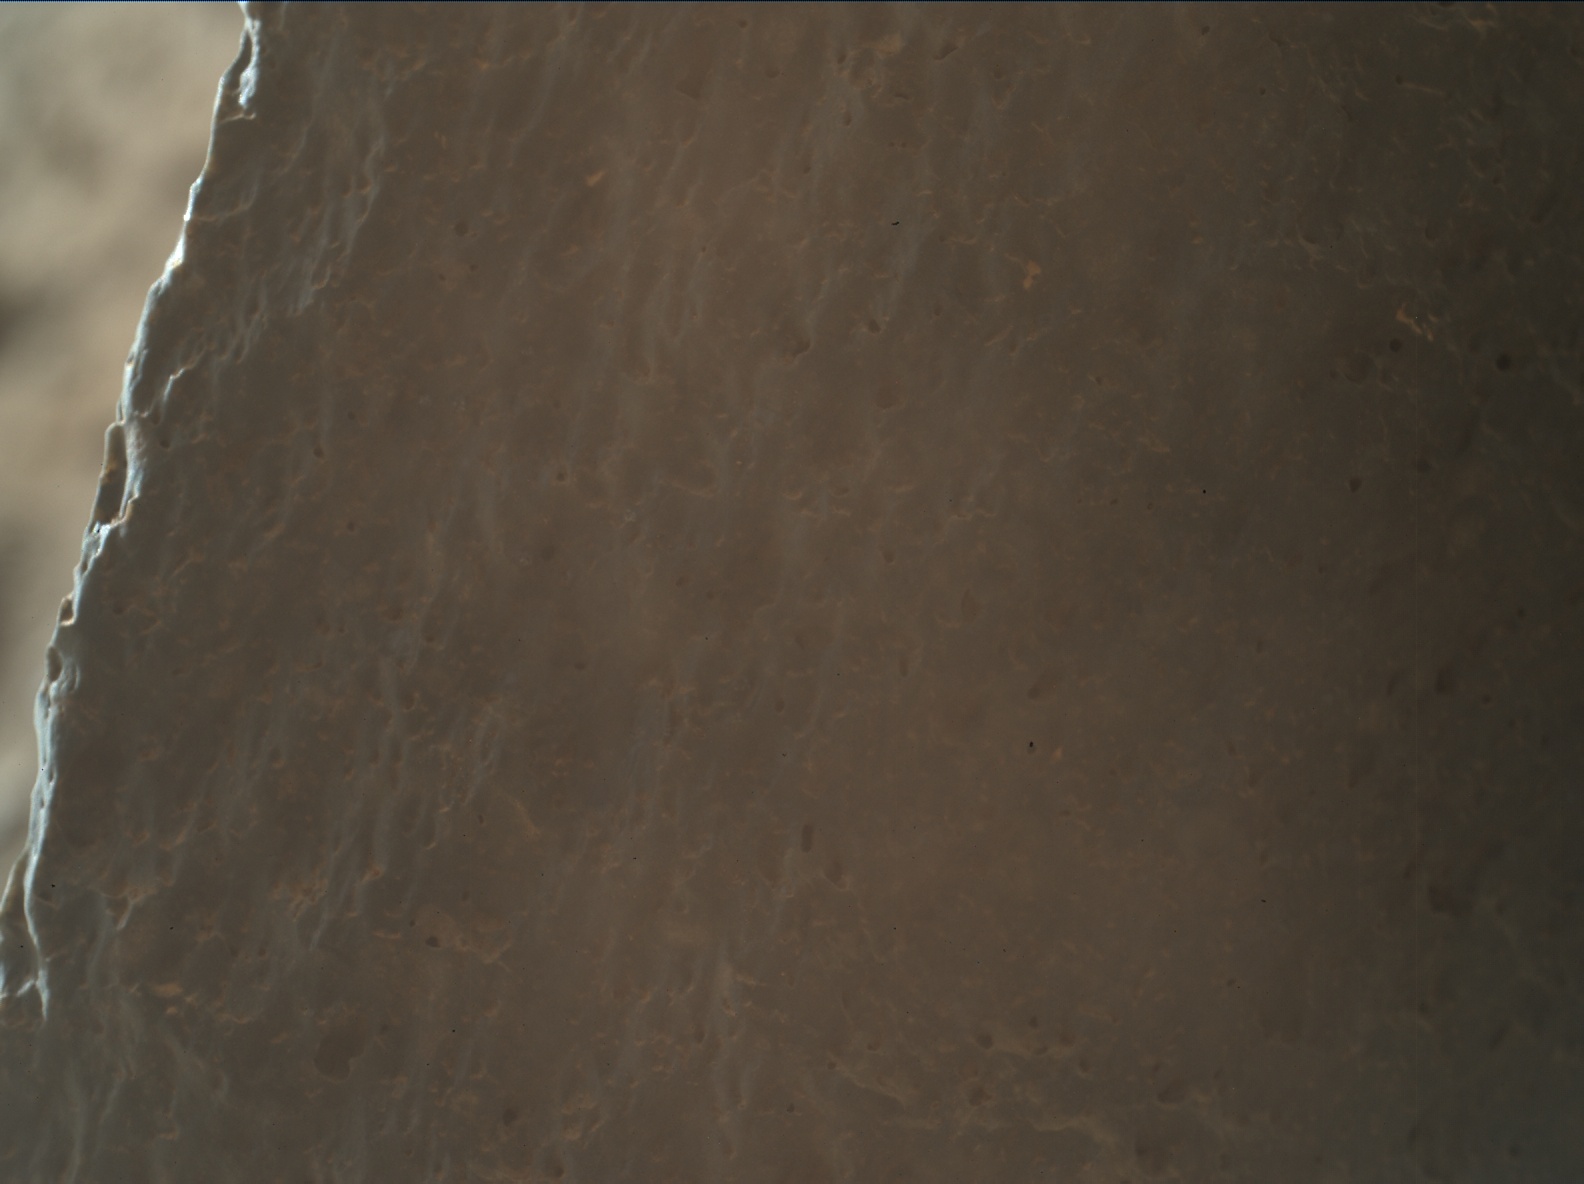 Nasa's Mars rover Curiosity acquired this image using its Mars Hand Lens Imager (MAHLI) on Sol 2016